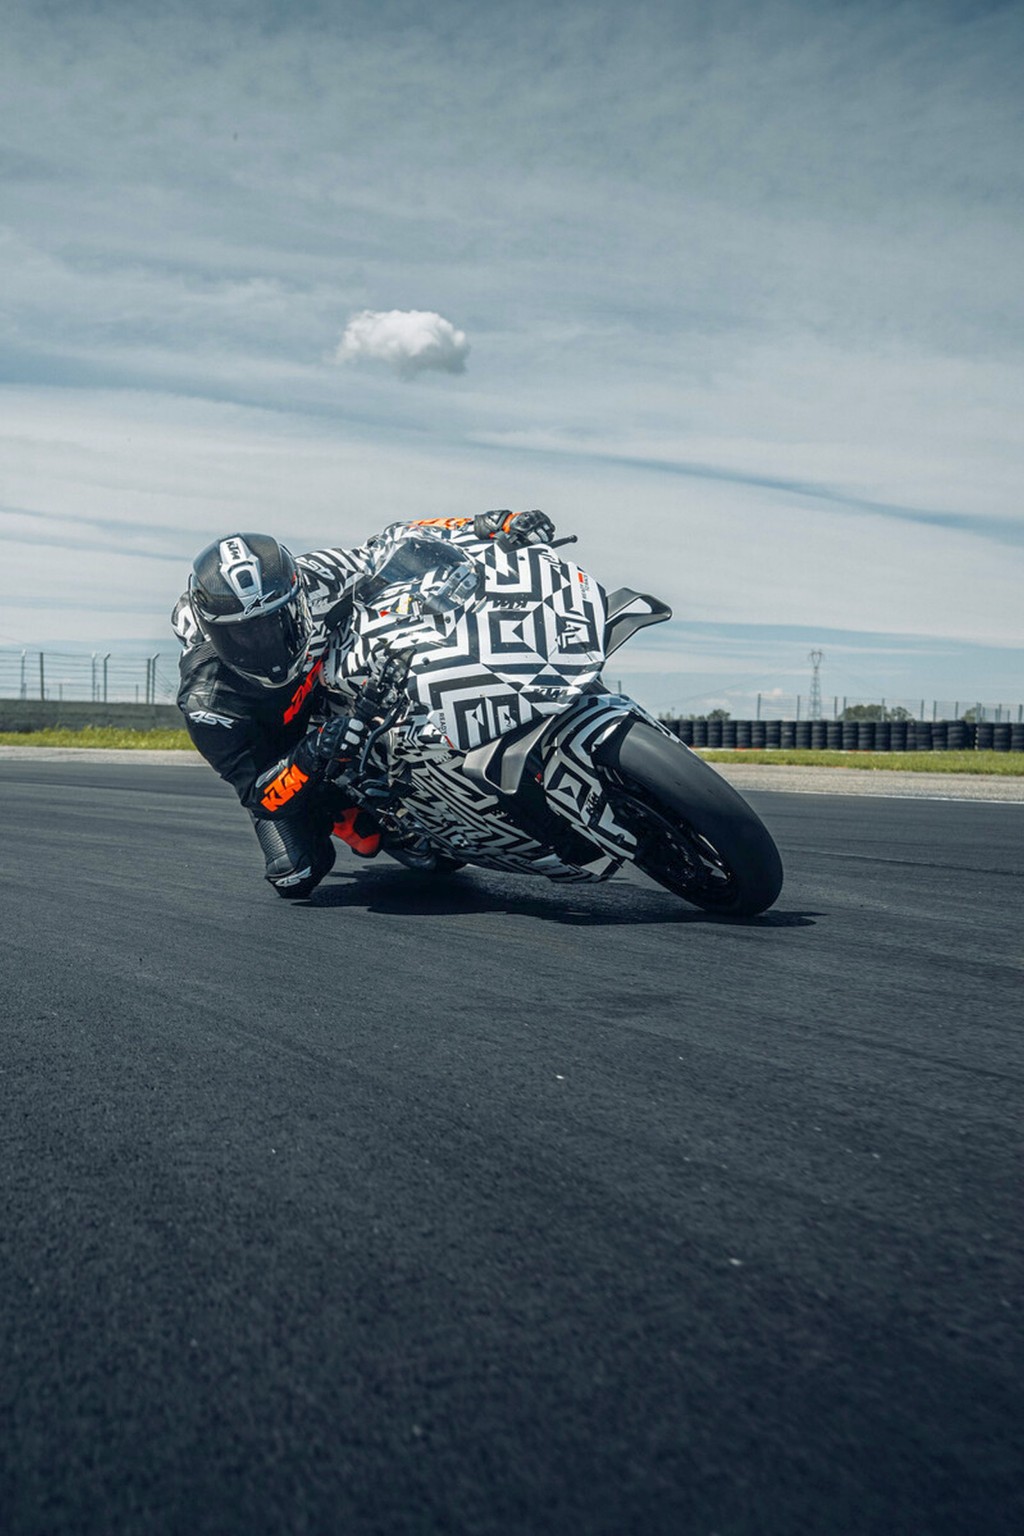 KTM 990 RC R - finally the thoroughbred sports bike for the road! - Image 11